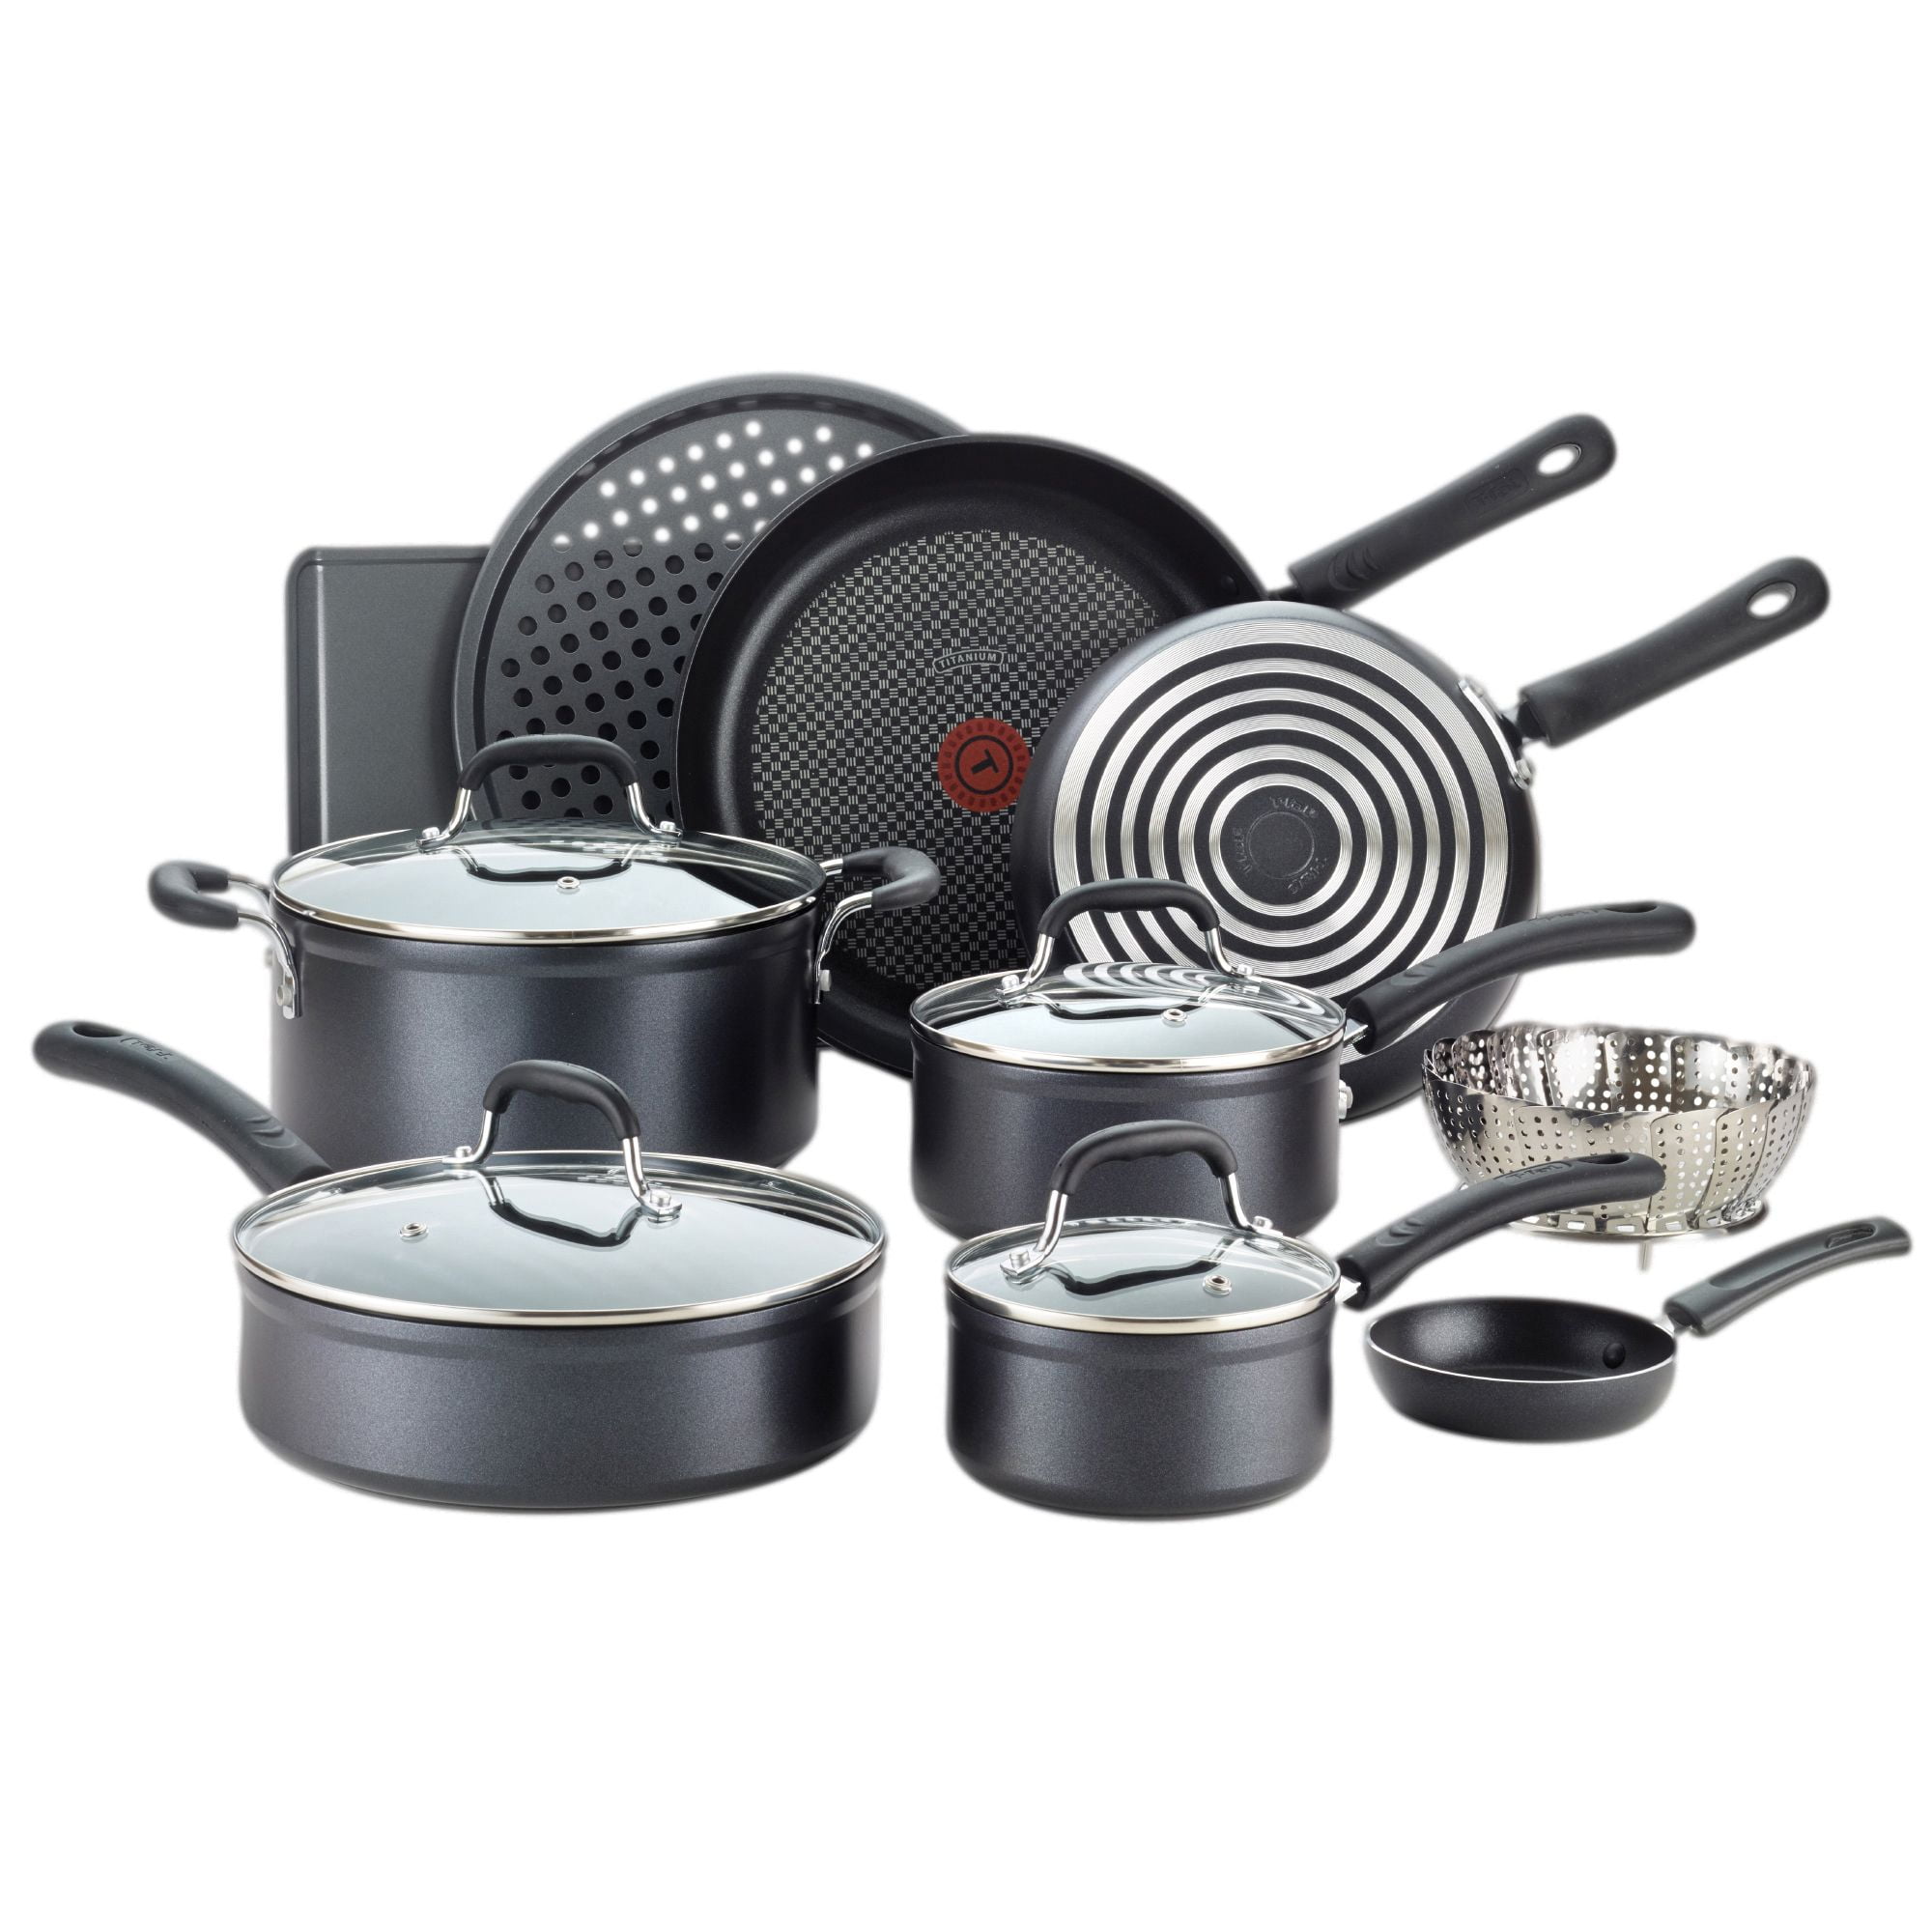 T-fal Ultimate Hard Anodized Nonstick Cookware Set 14 Piece Oven Safe 400F,  Lid Safe 350F Pots and Pans, Dishwasher Safe Black - Yahoo Shopping